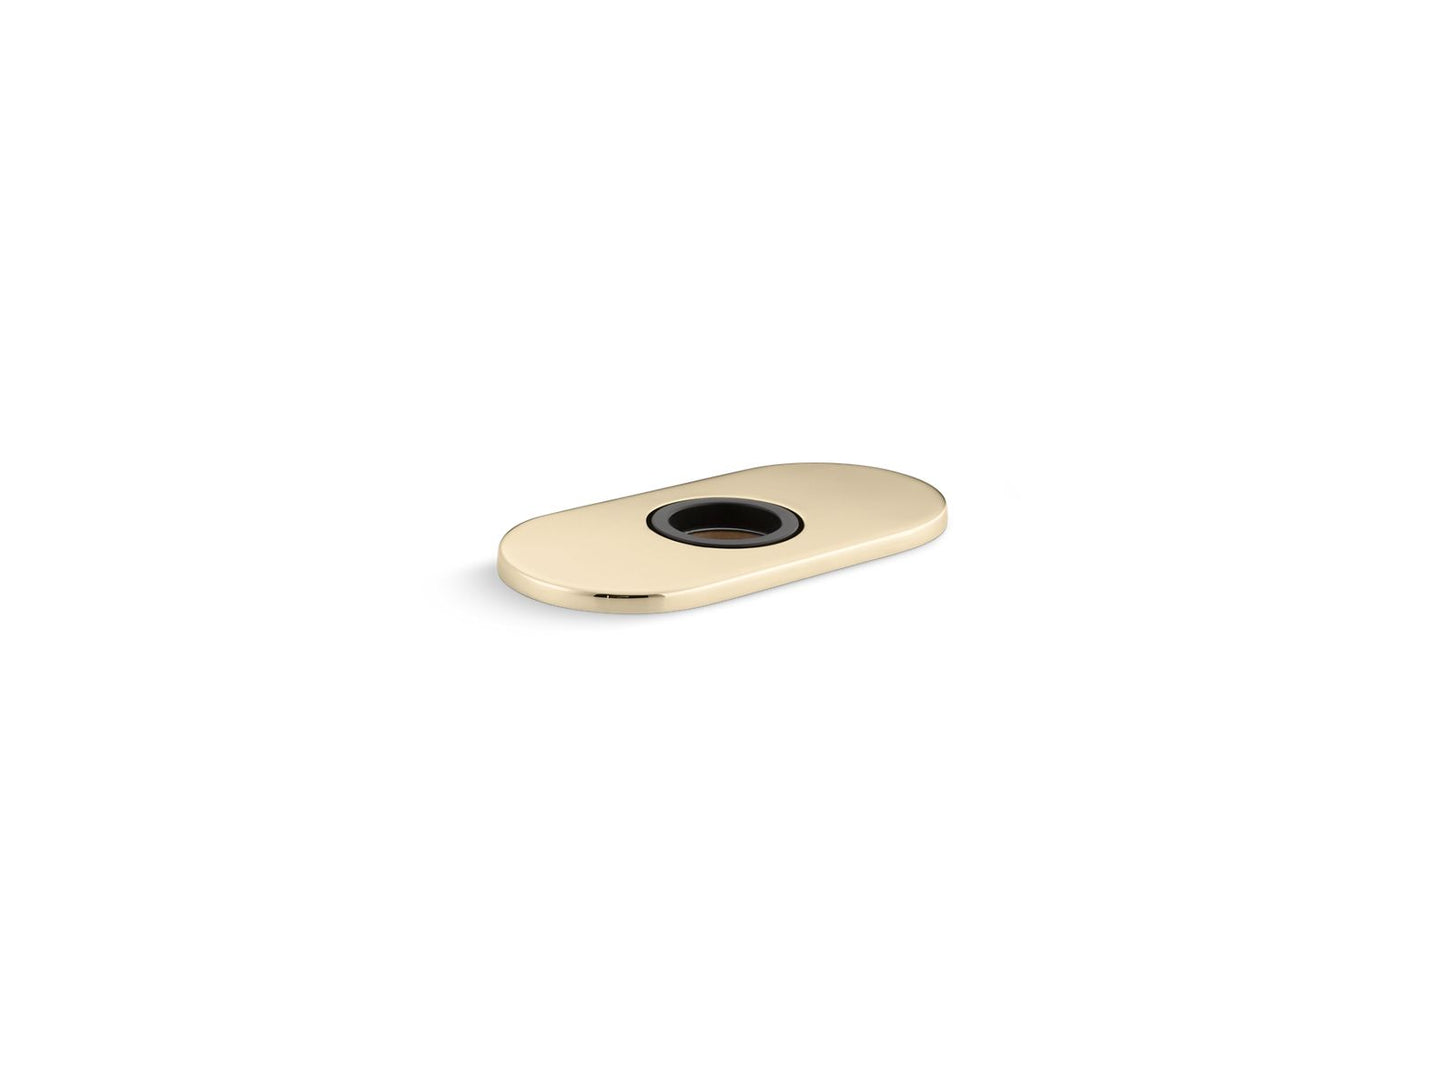 KOHLER K-13478-A-AF 4" Escutcheon Plate For Insight And Kinesis Faucet In Vibrant French Gold